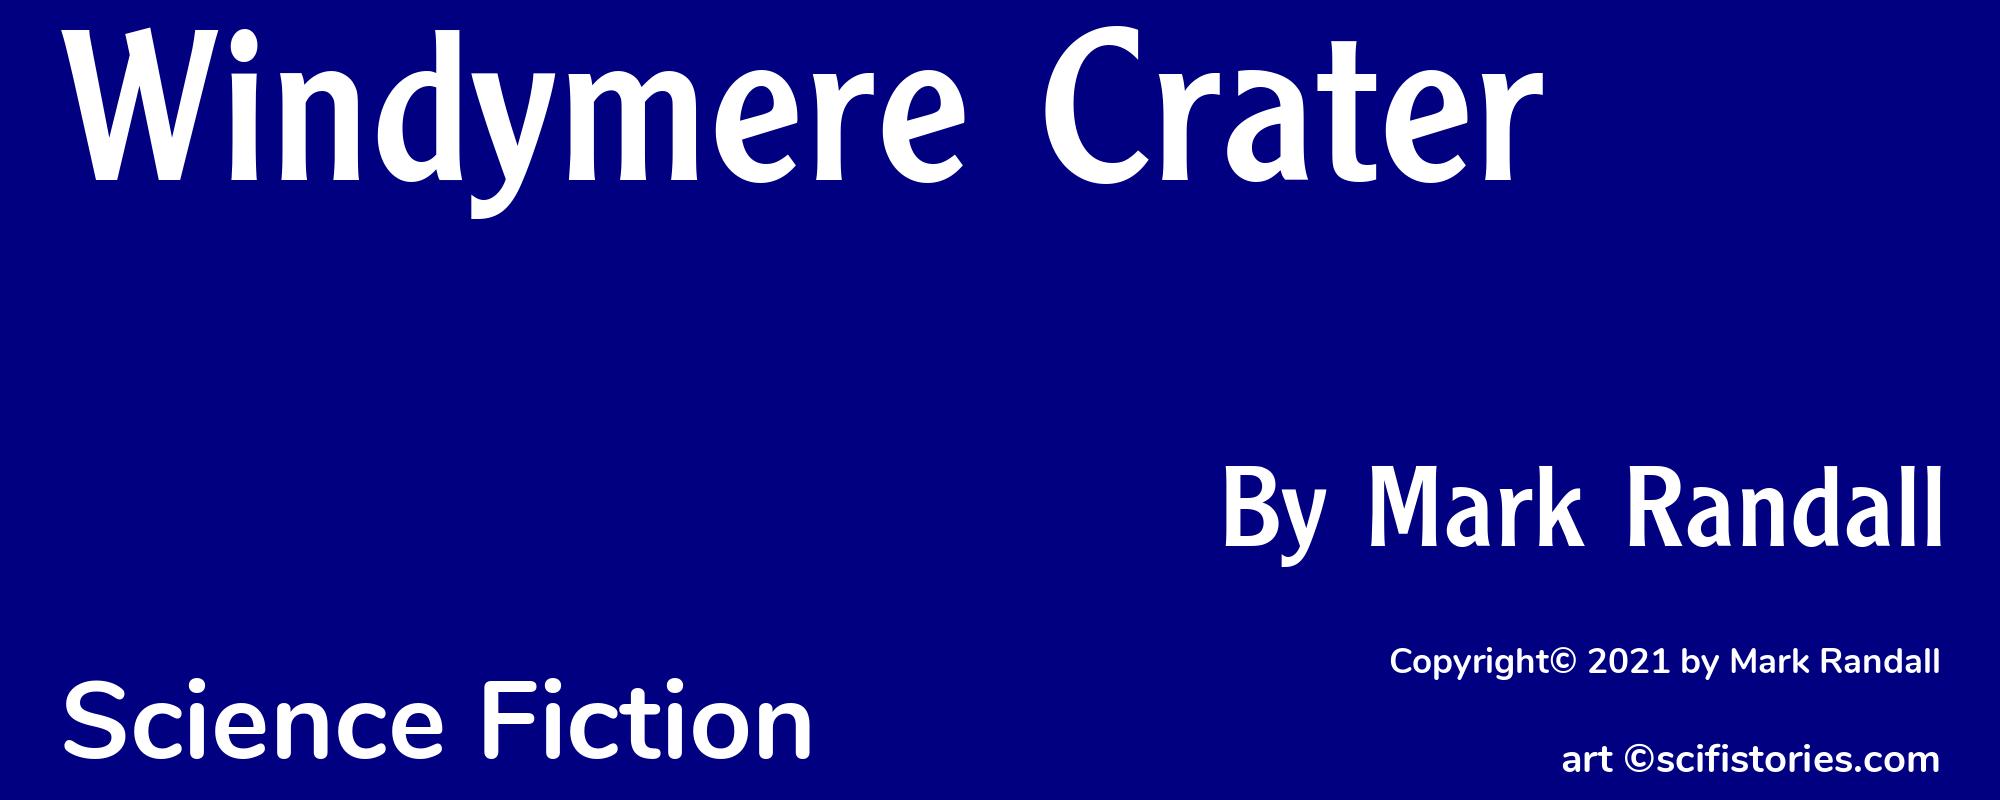 Windymere Crater - Cover